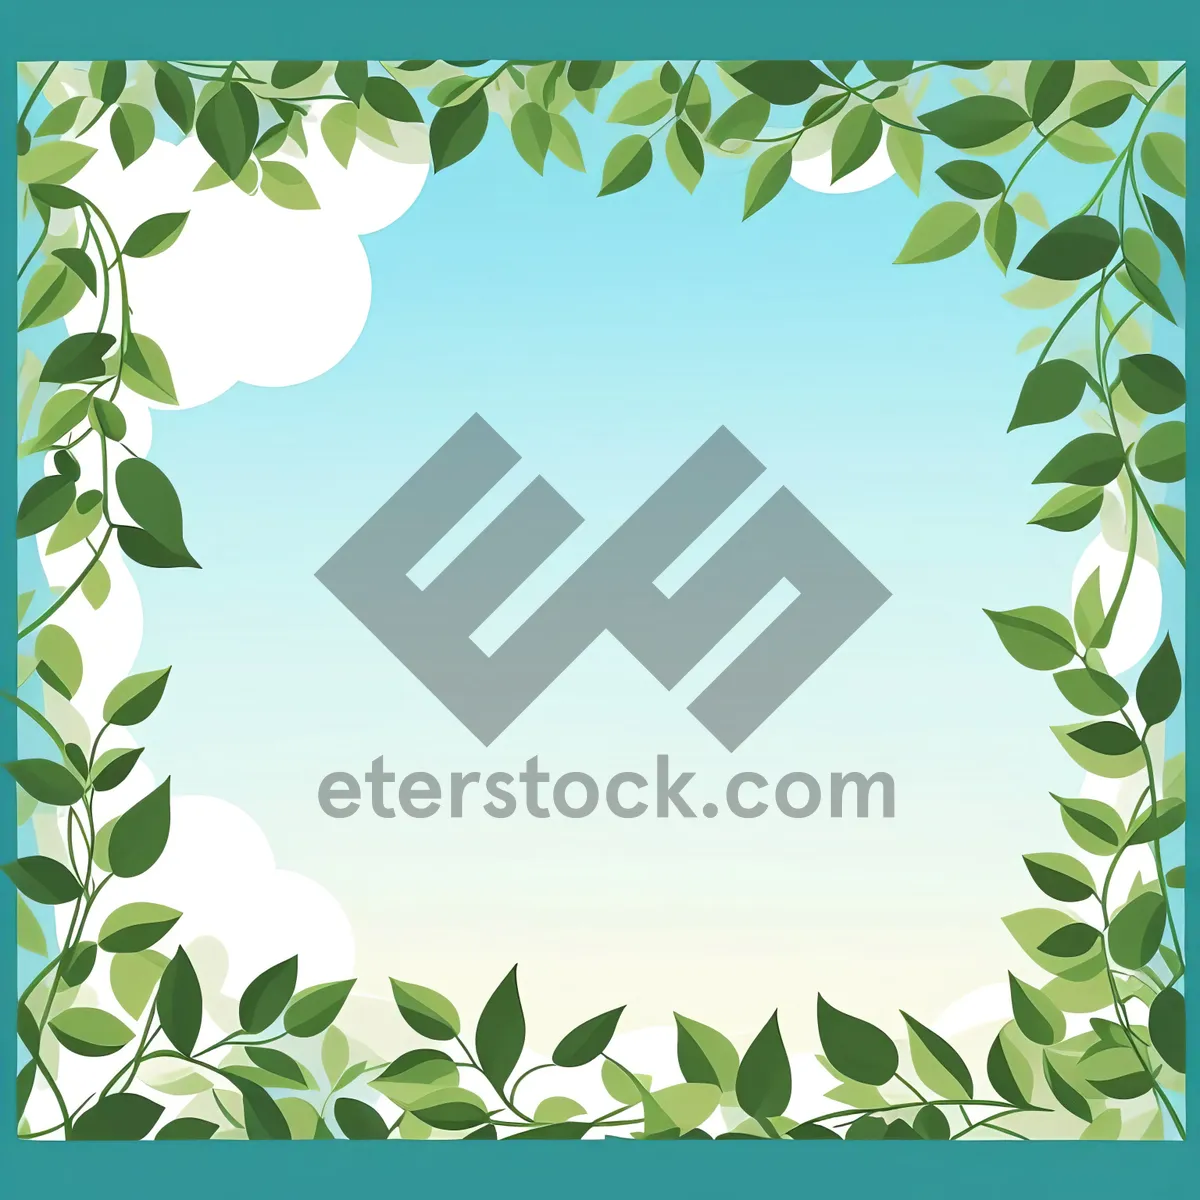 Picture of Floral Border with Holly Ornament and Leaf Design